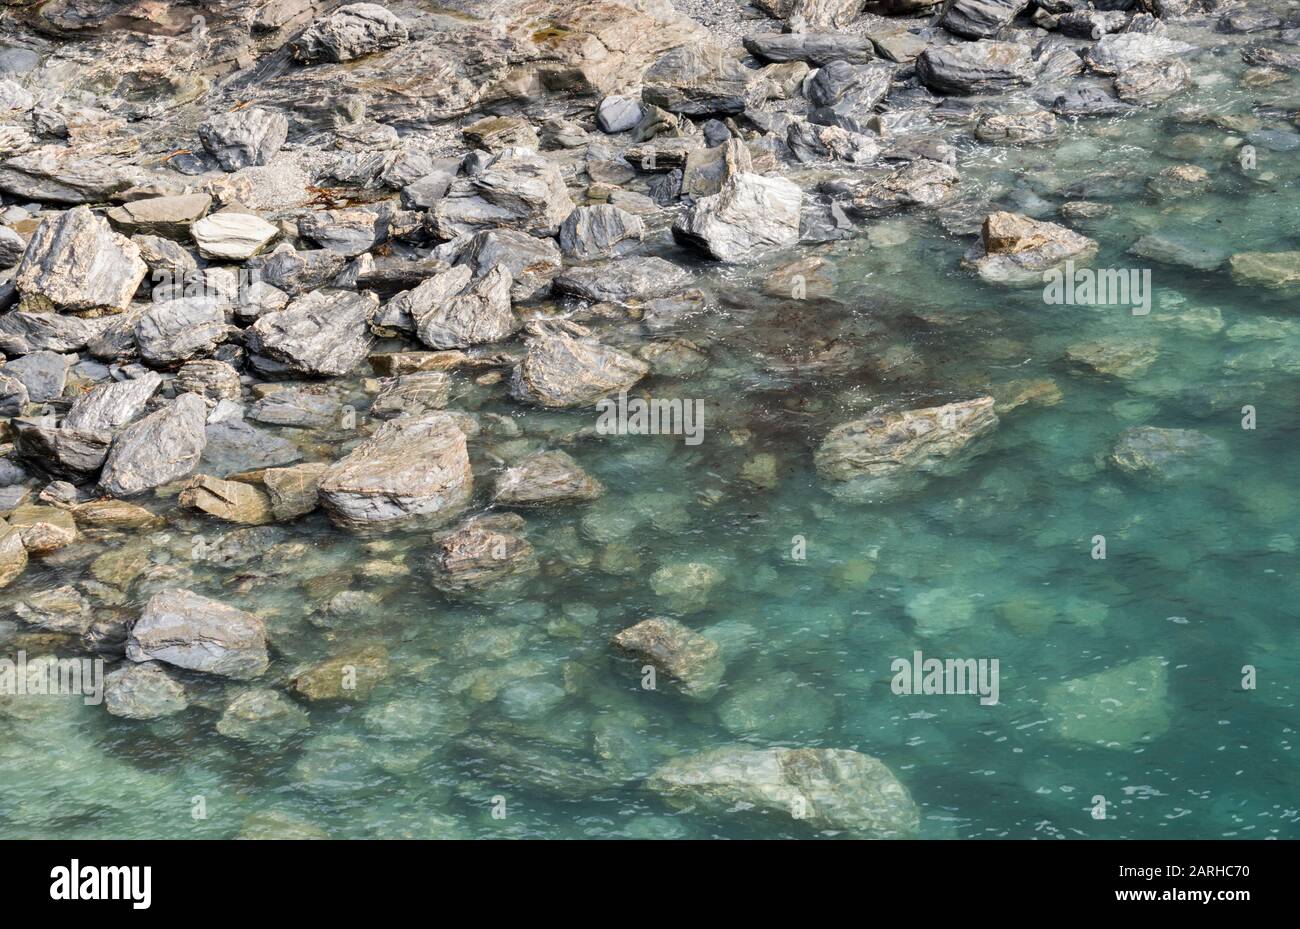 Crystal clear turquoise waters over rocks on the beach, Cornwall, UK Stock Photo